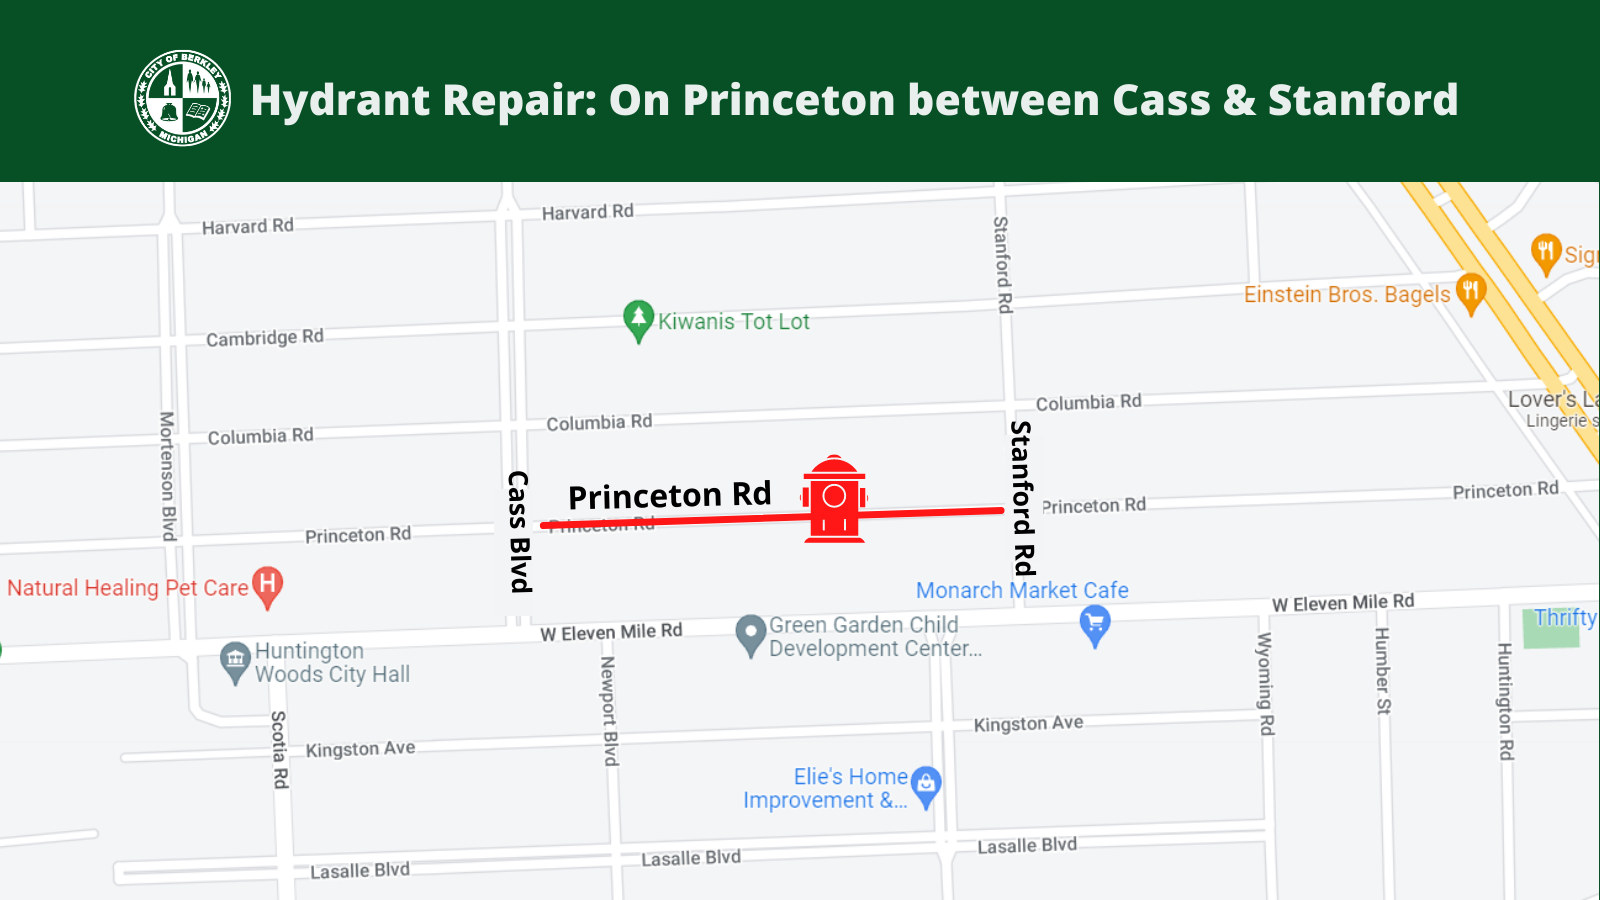 Hydrant Repair Map - On Princeton between Cass & Stanford